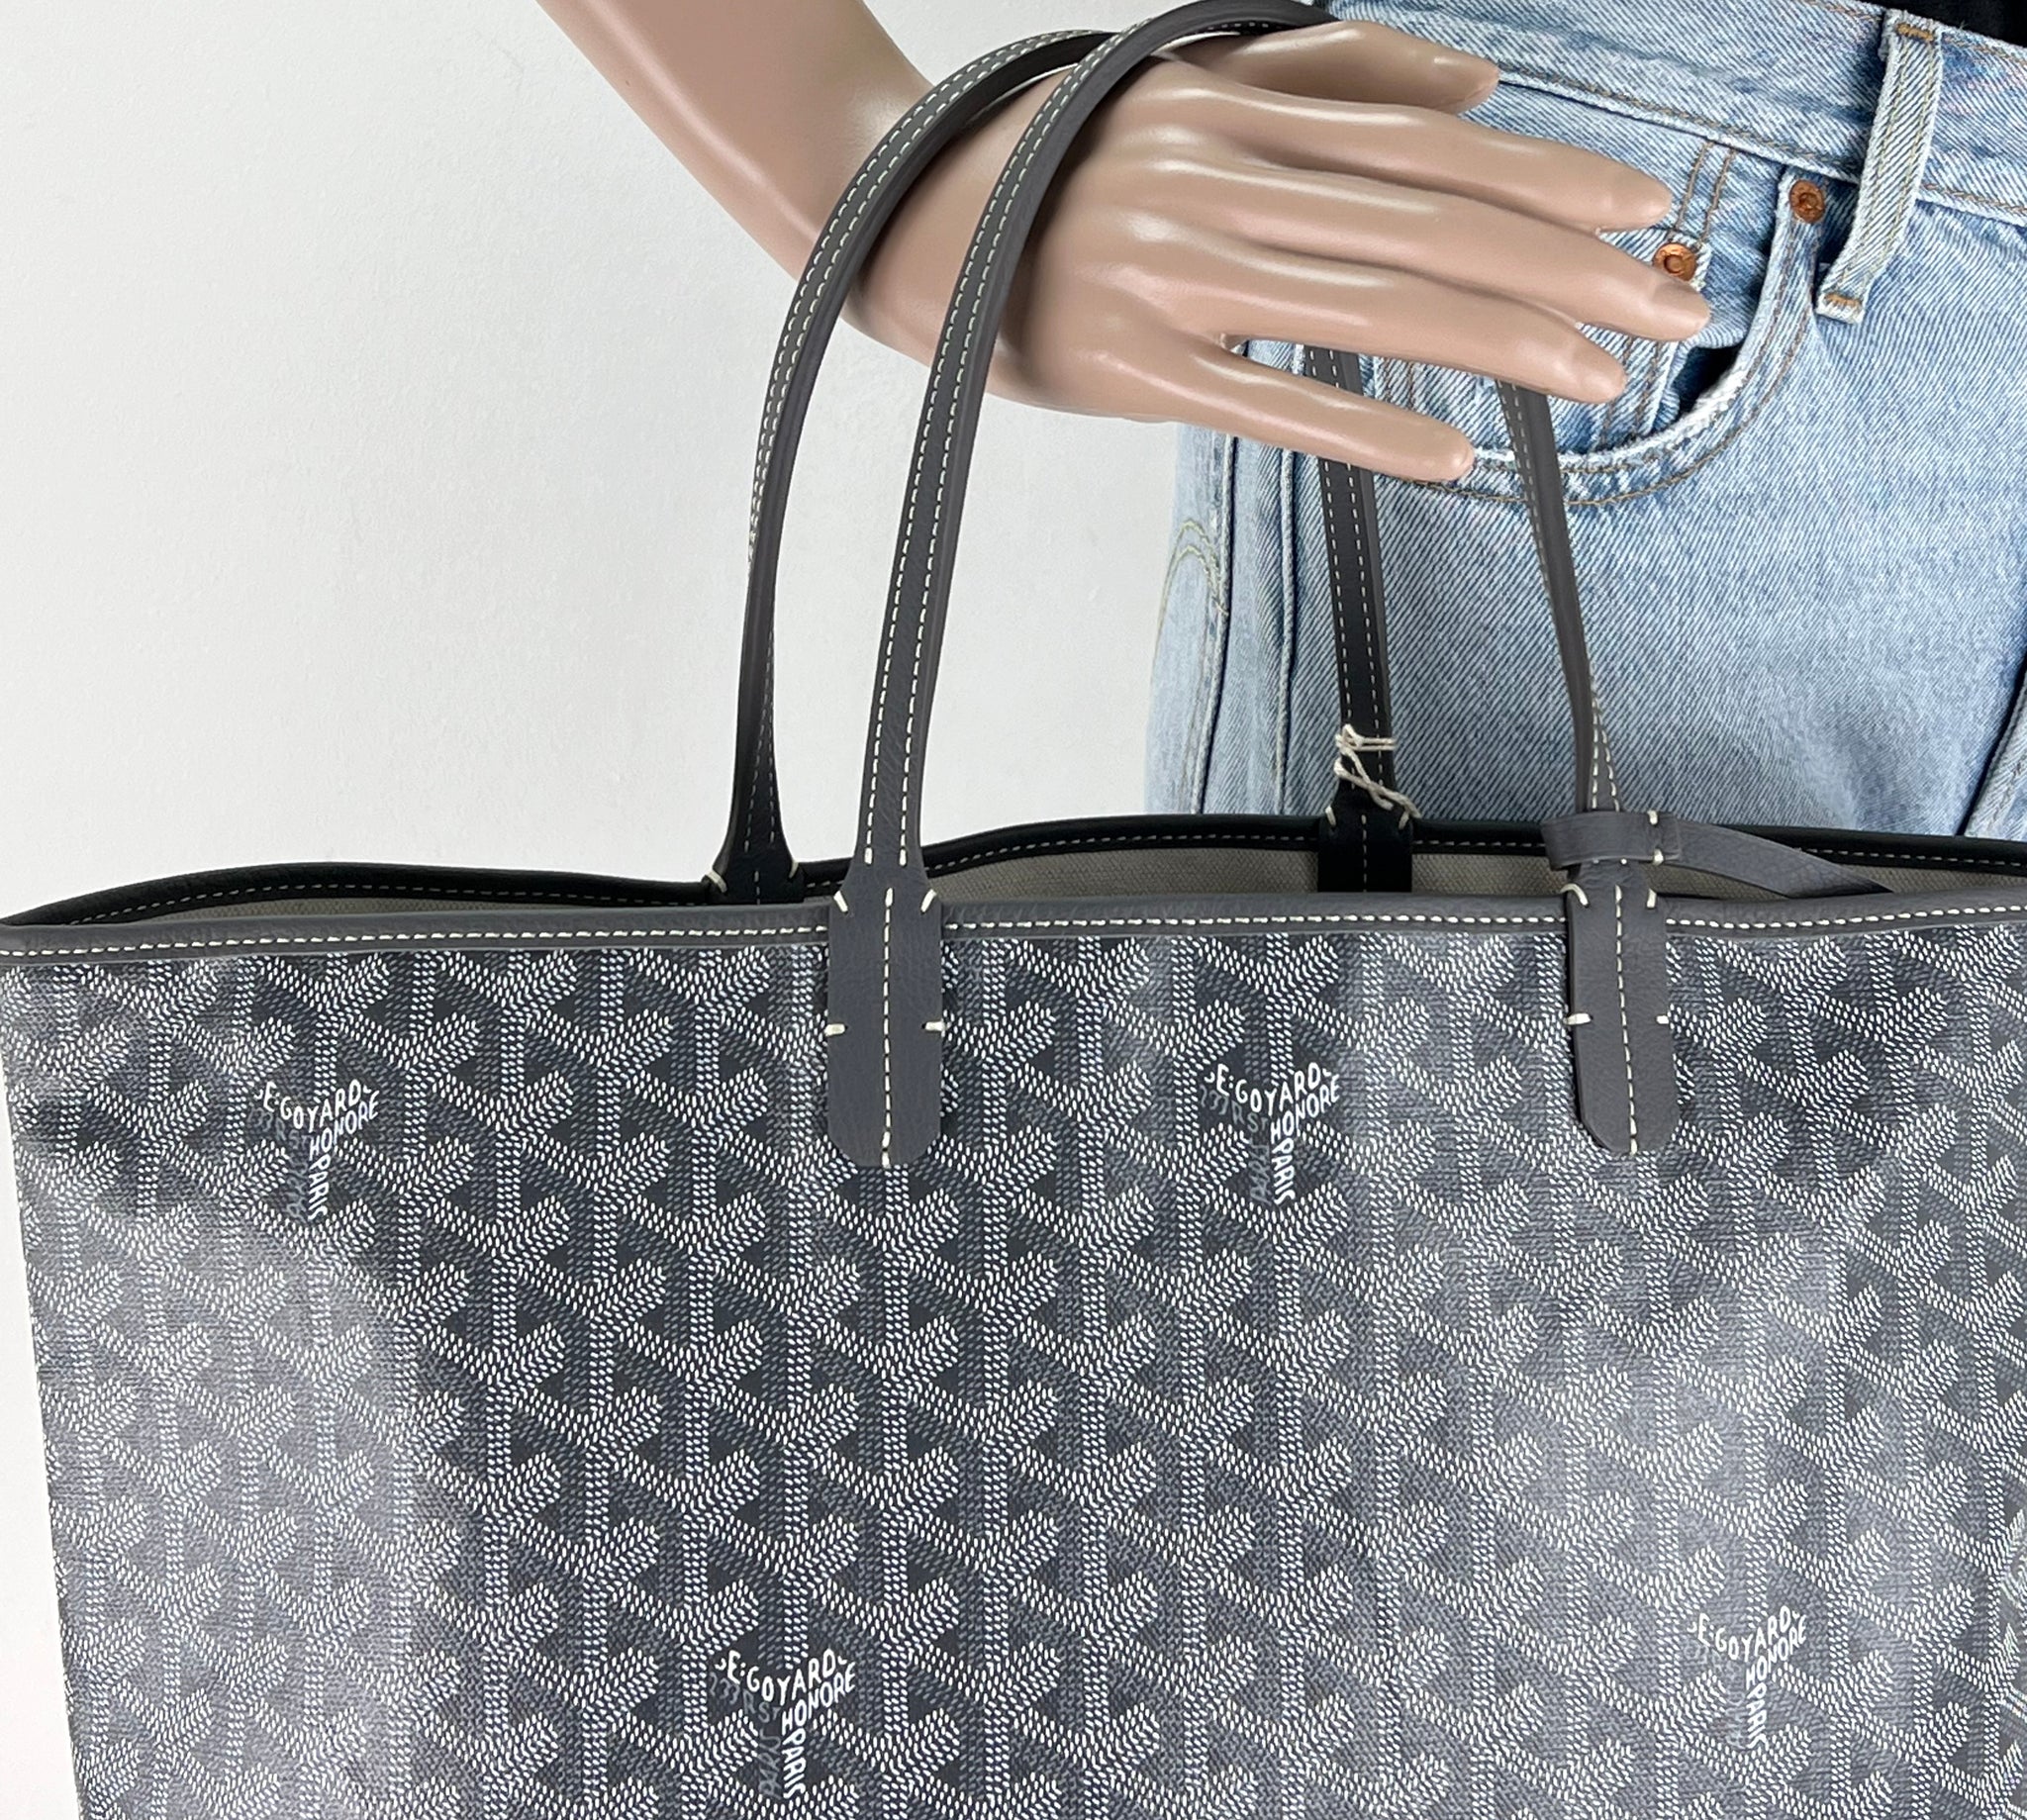 Goyard st Louis pm tote with pochette grey – Lady Clara's Collection